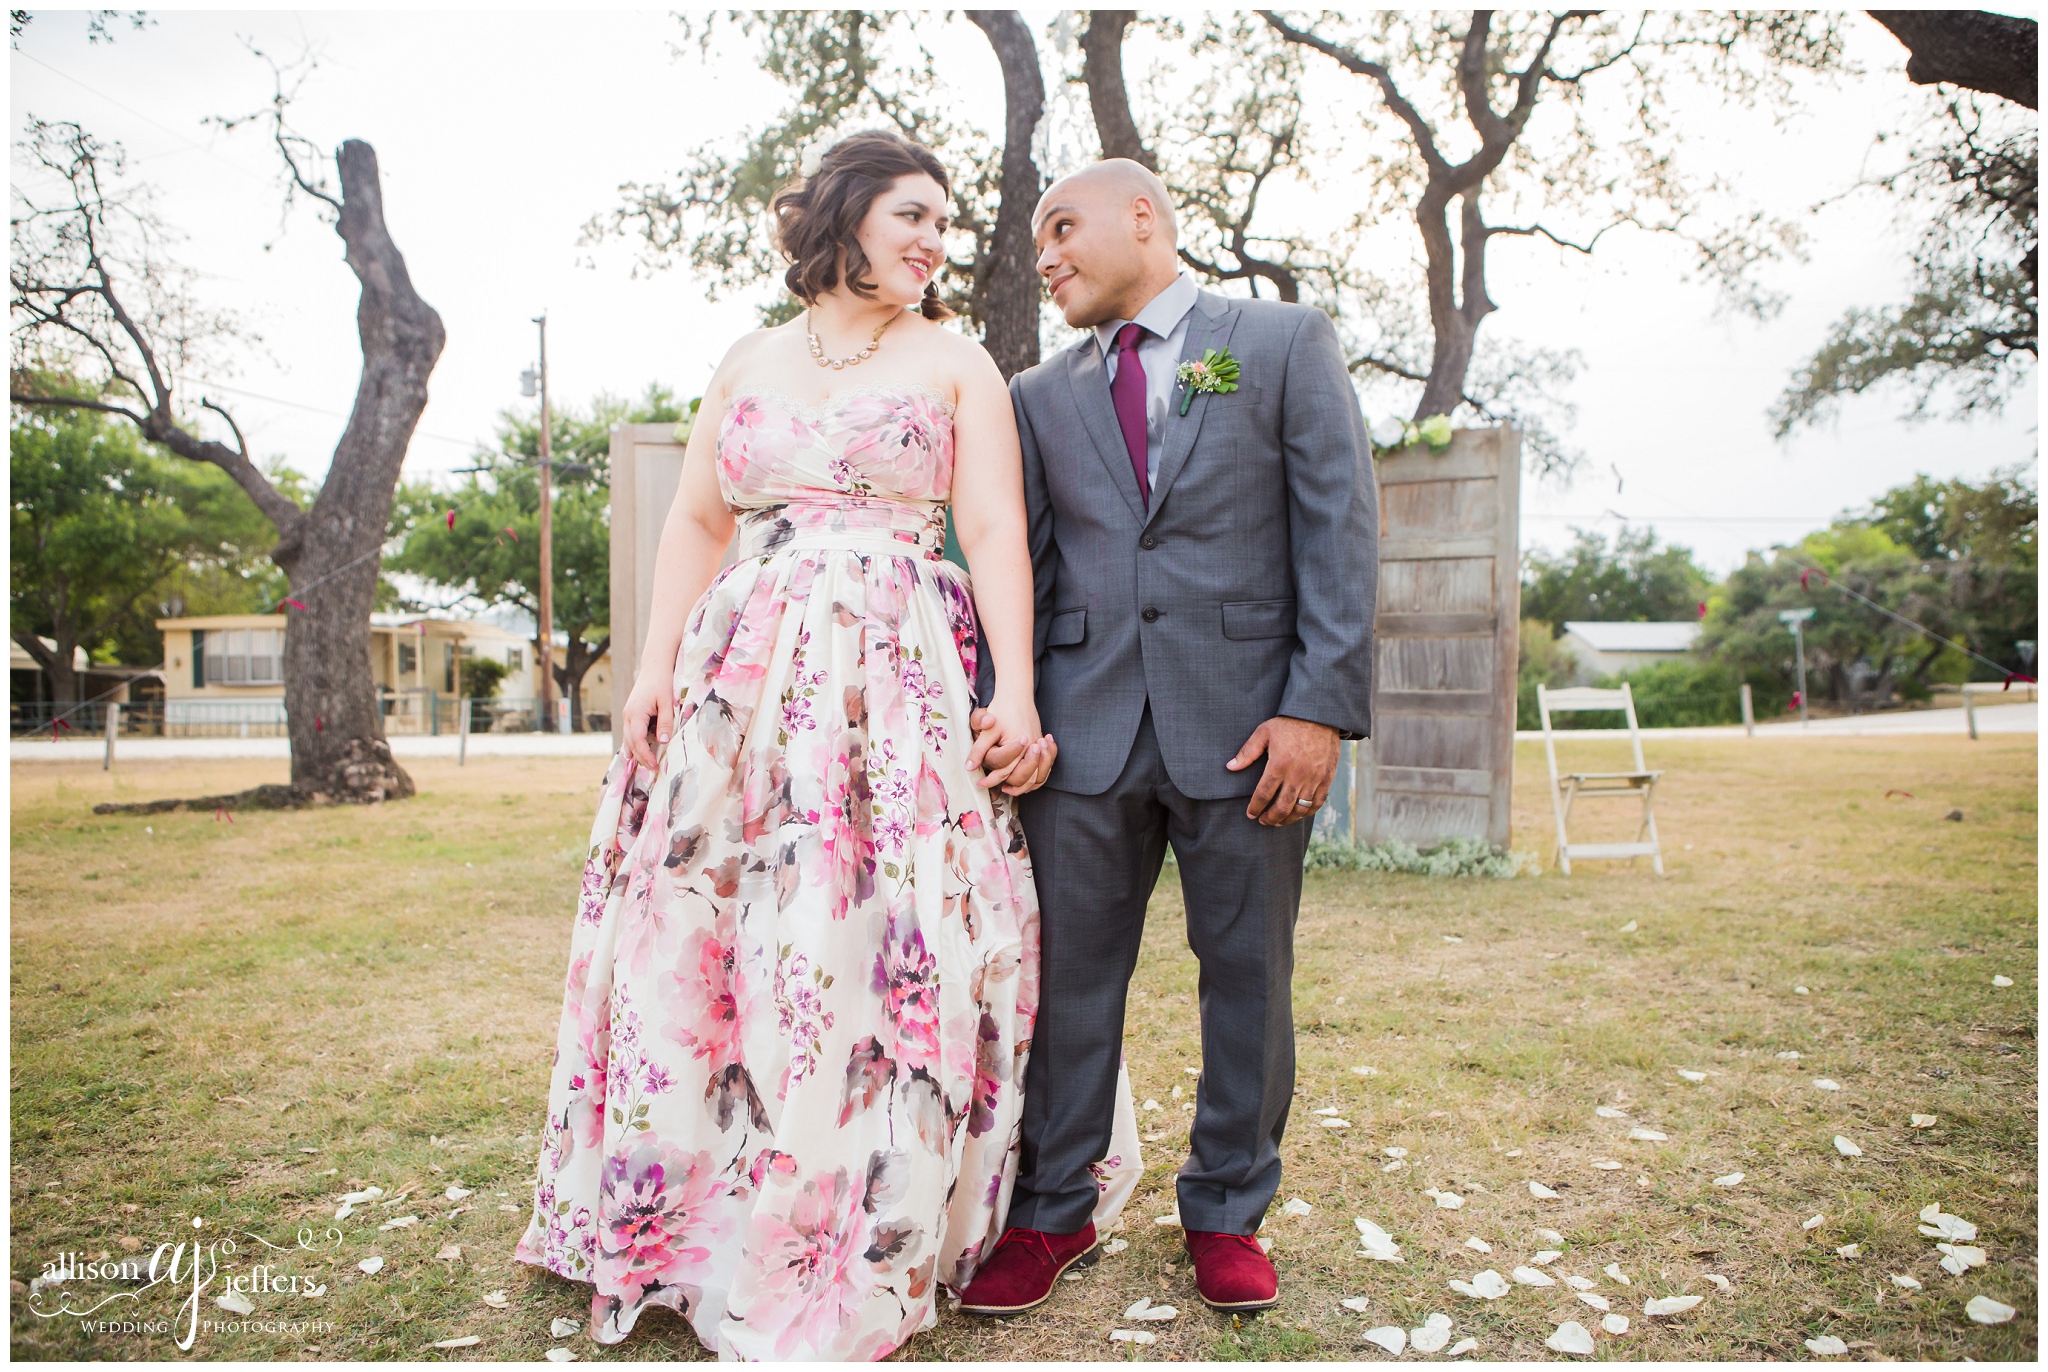 Kerrville Wedding Photographer Unique fun wedding with floral dress 0063